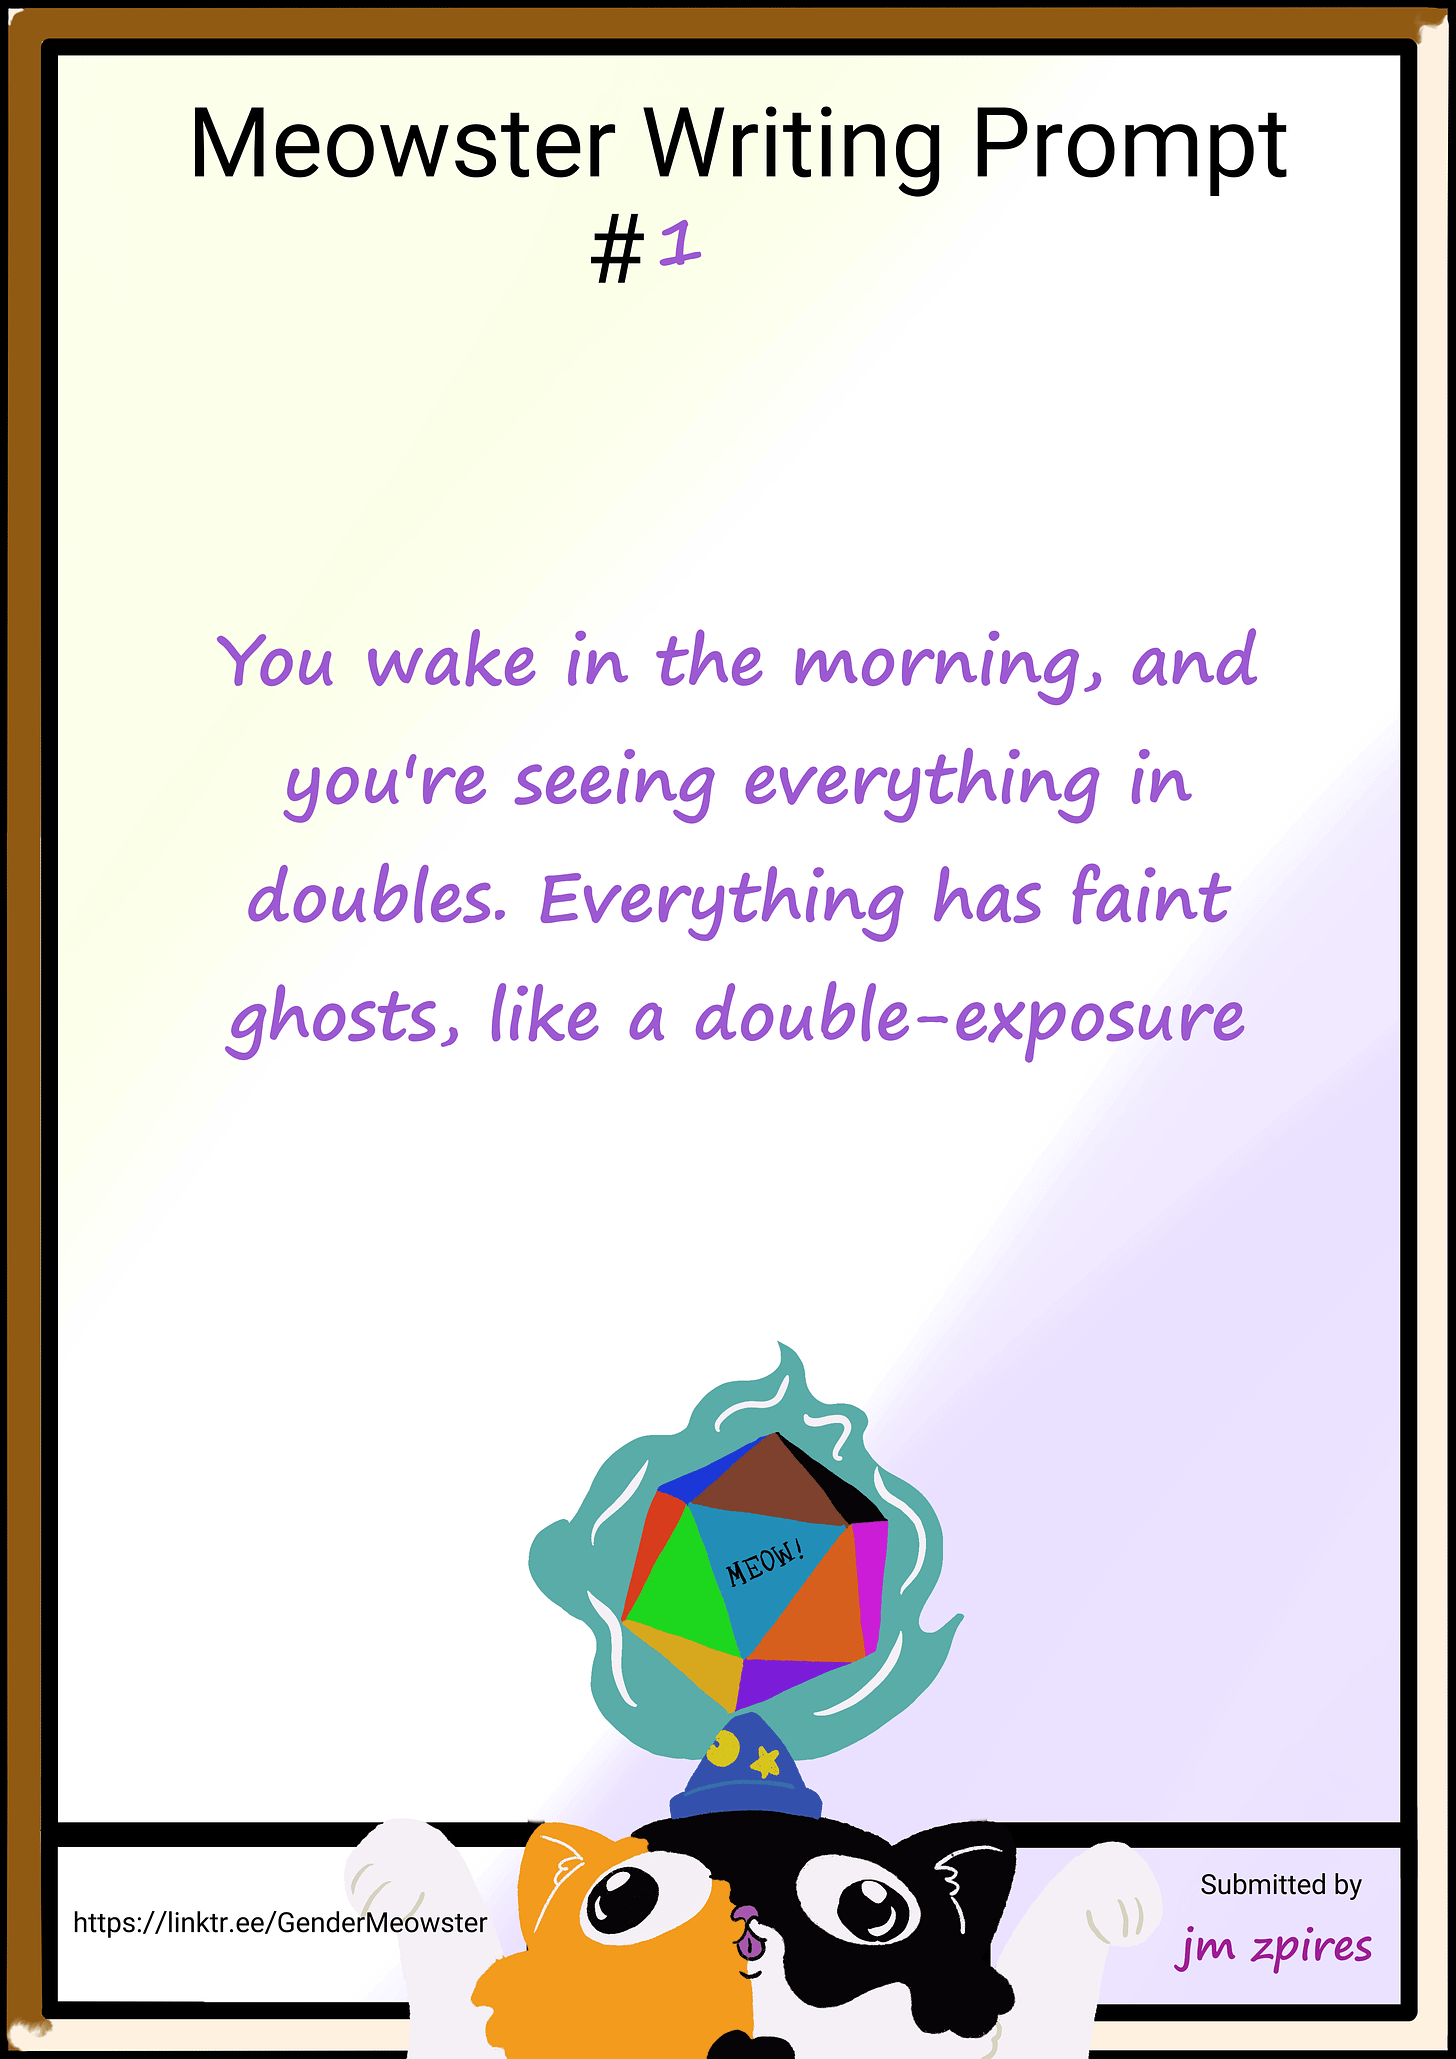 You wake in the morning, and you're seeing everything in doubles. Everything has faint ghosts, like a double-exposure.